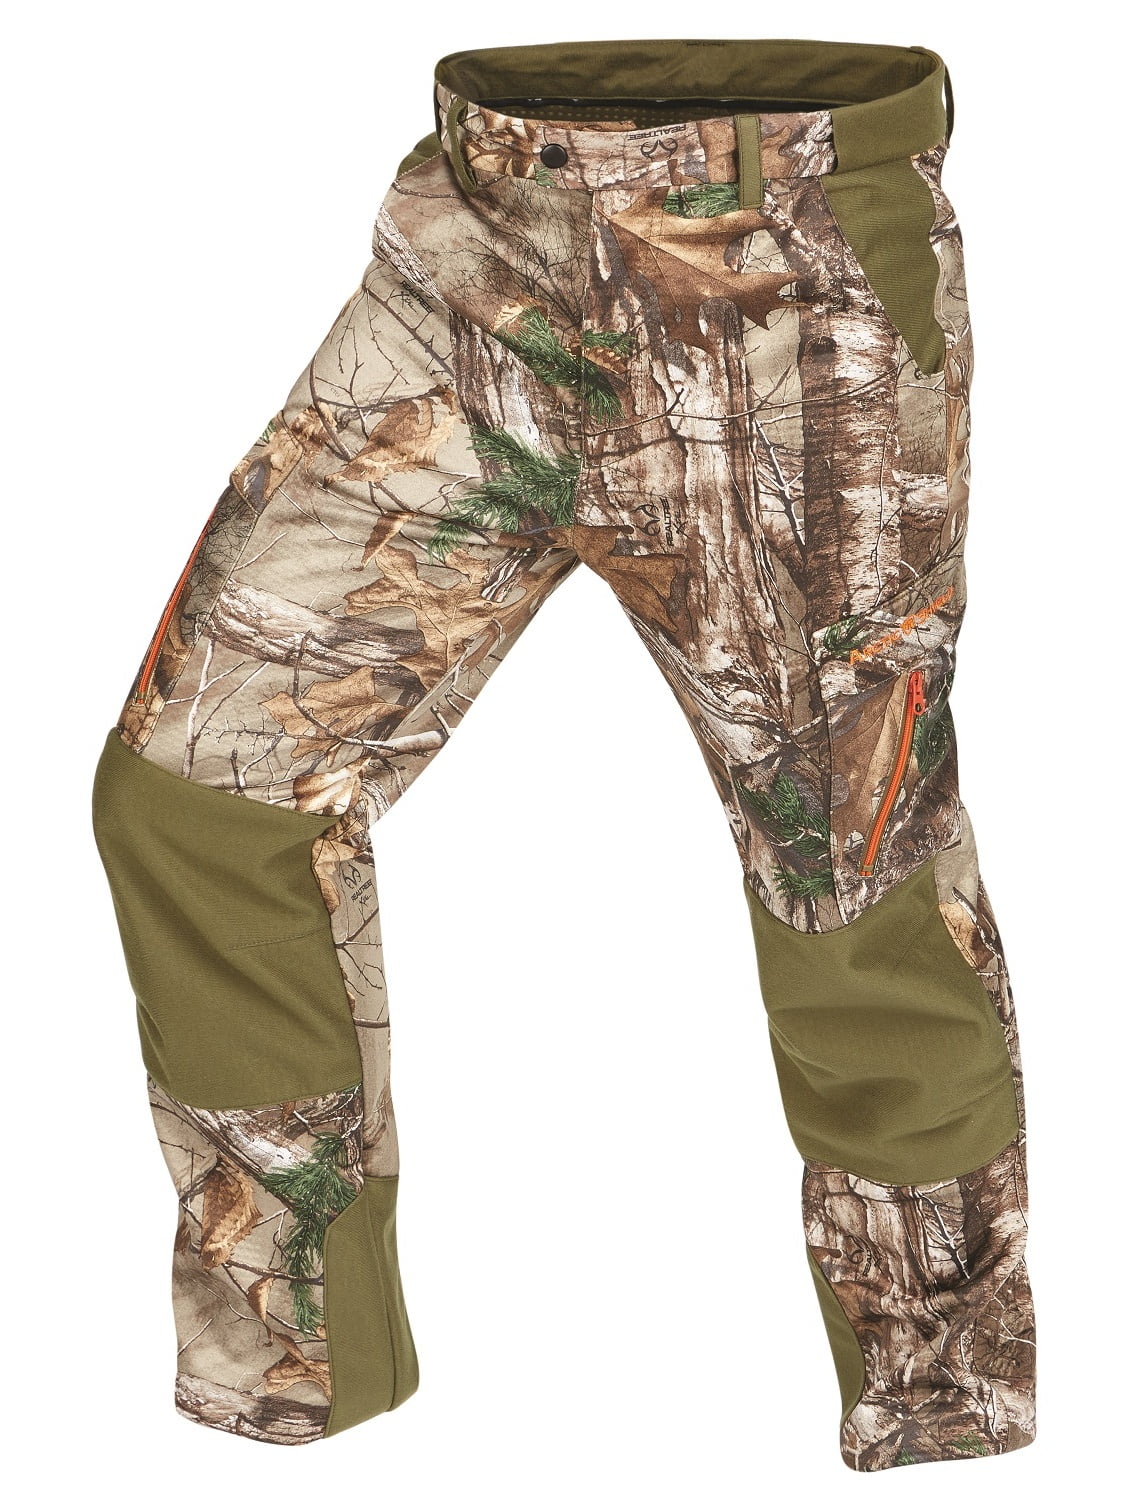 New Arctic Shield Heat Echo Hydrovore Realtree Edge Pant 